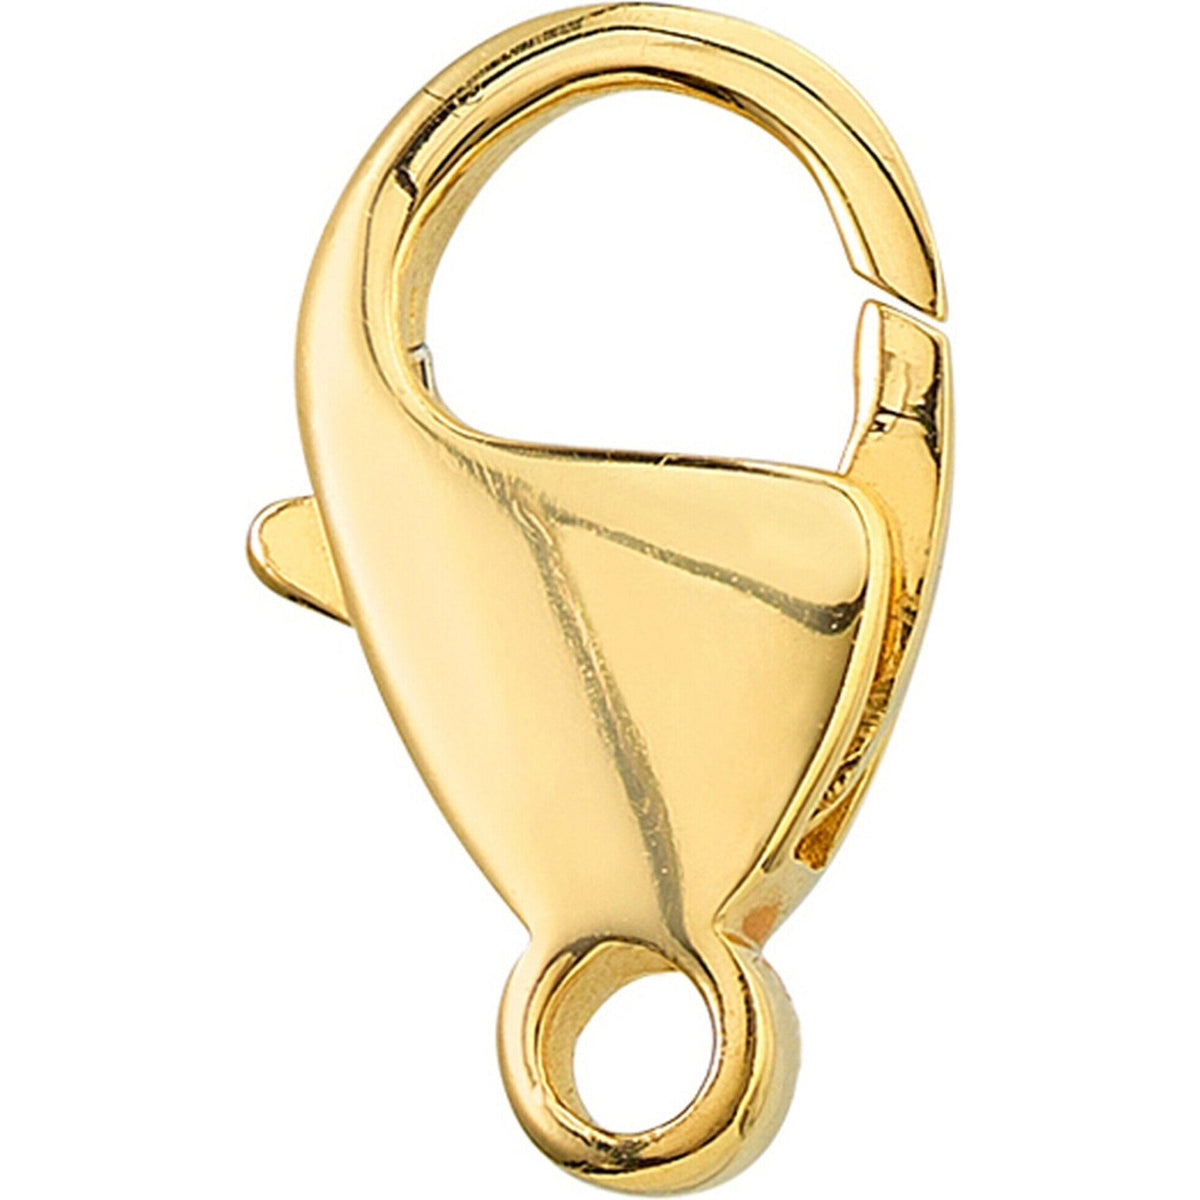 Close-up of a lobster clasp on a gold ring